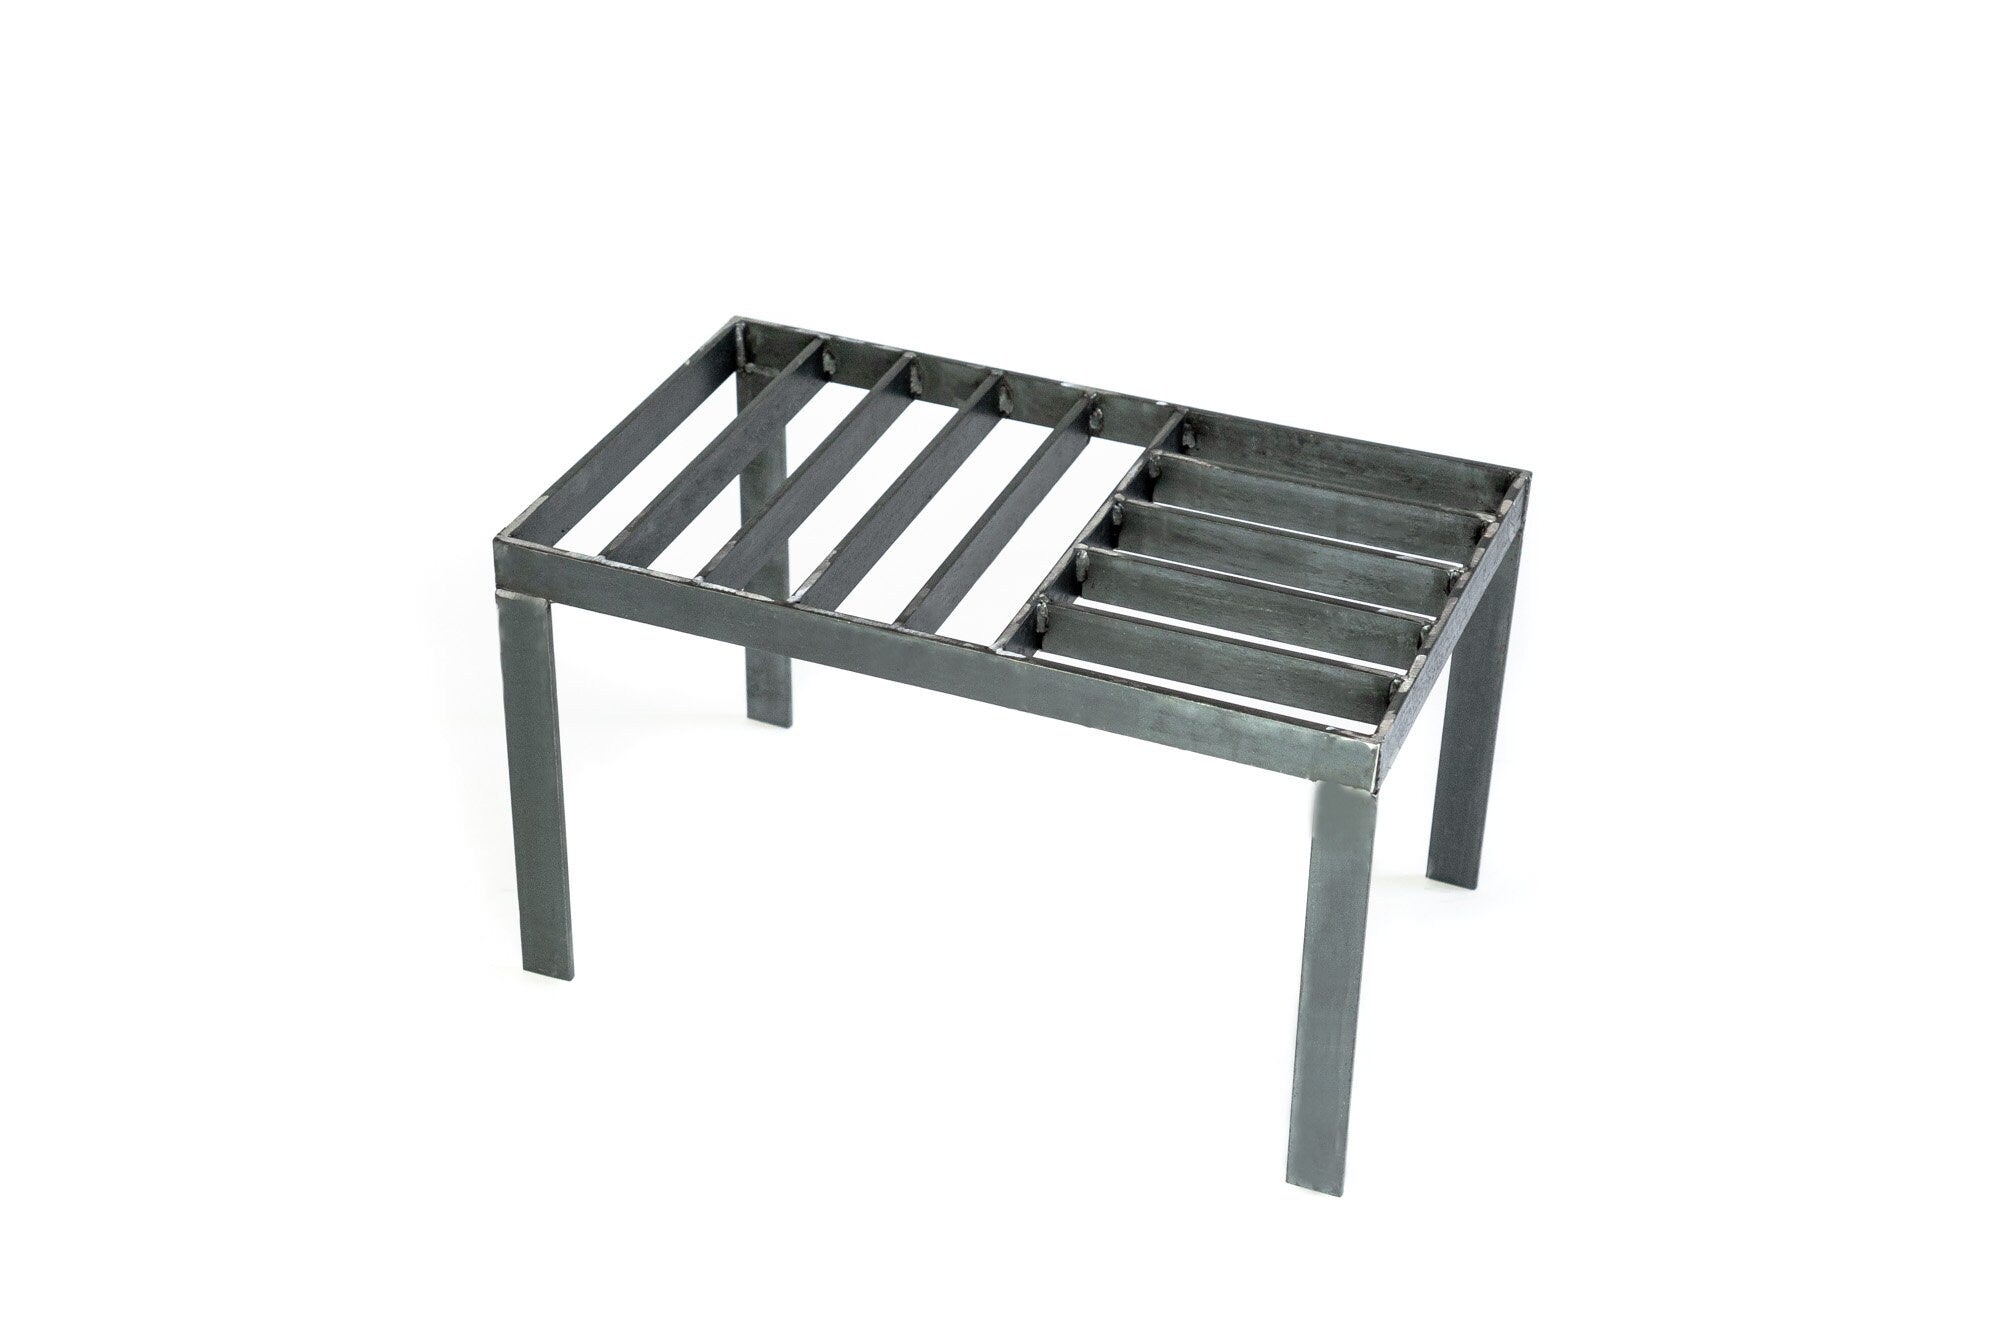 Gaucholife Grill Cooking Stands for the open fire. Heavy Duty Iron Contruccion 19.6 x 11.8 inches